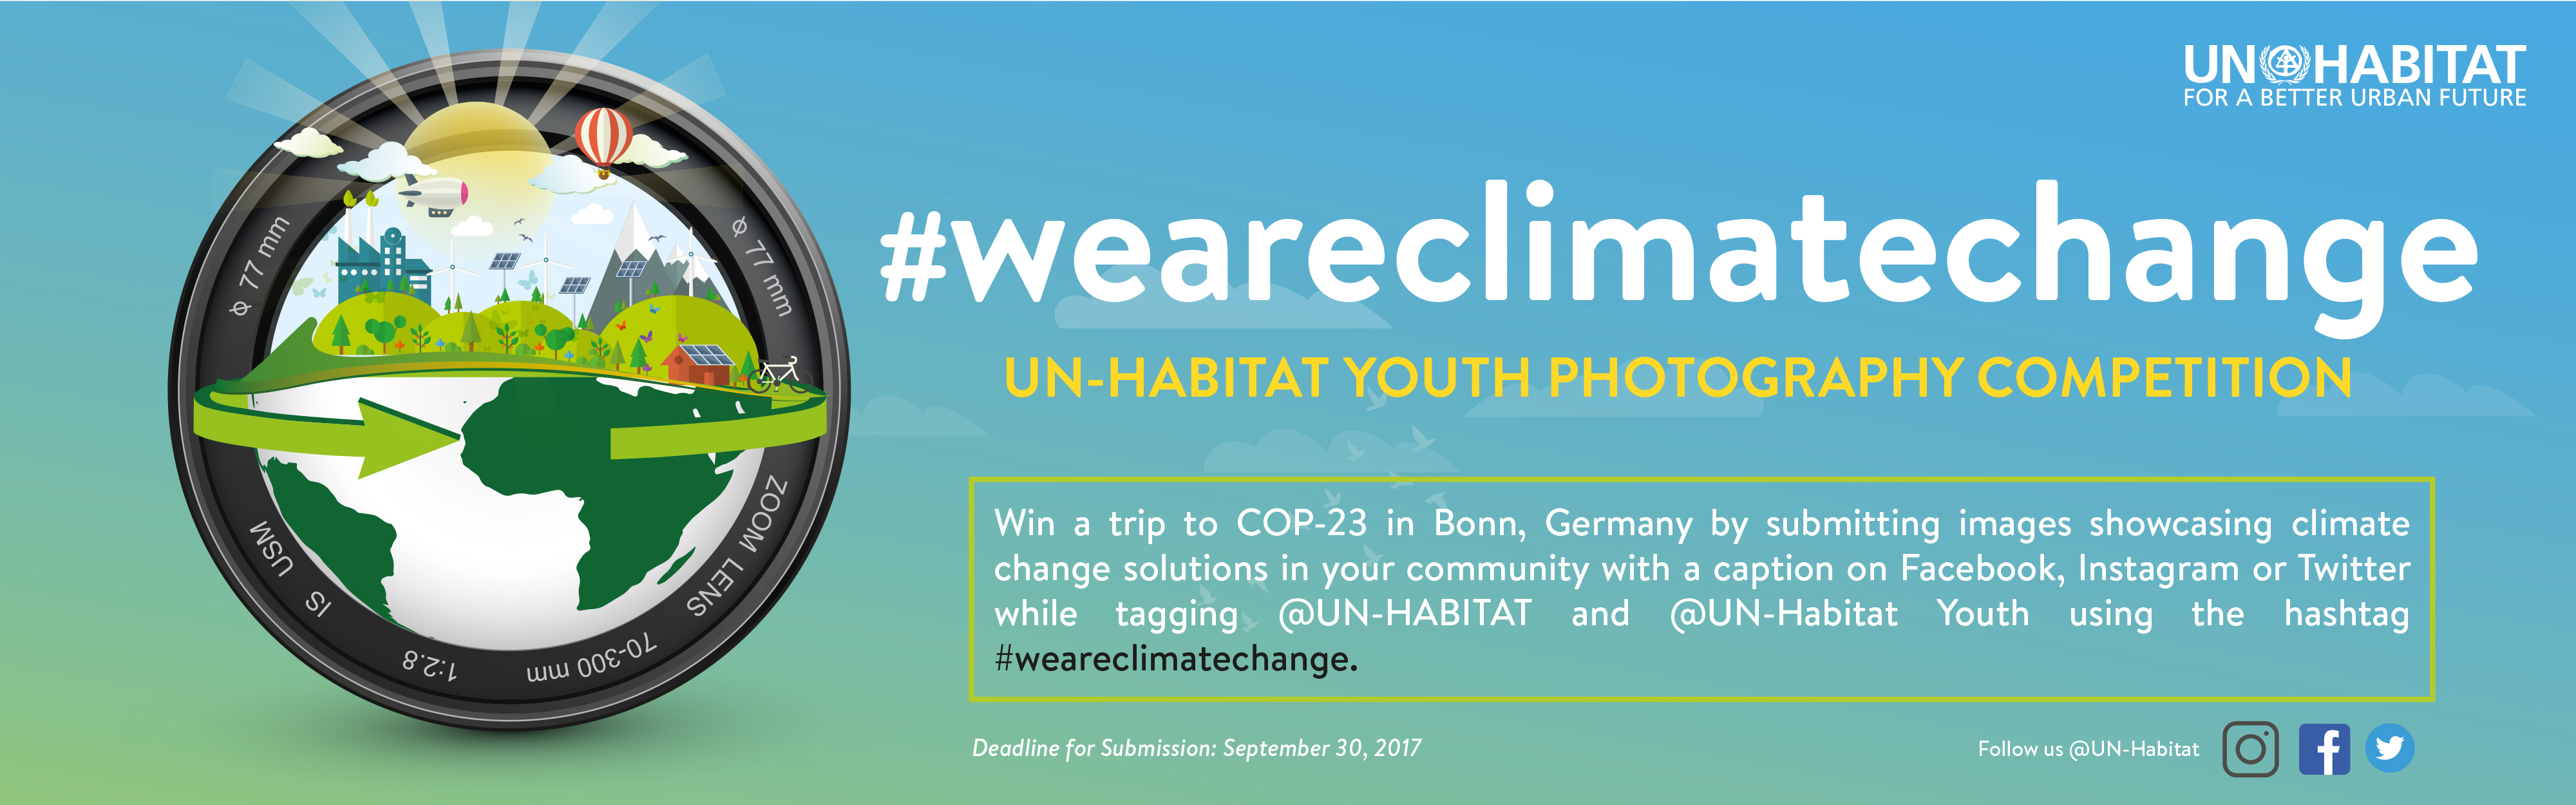 UN-Habitat Youth Photography Competition 2017 (Win A Trip to Bonn, Germany)